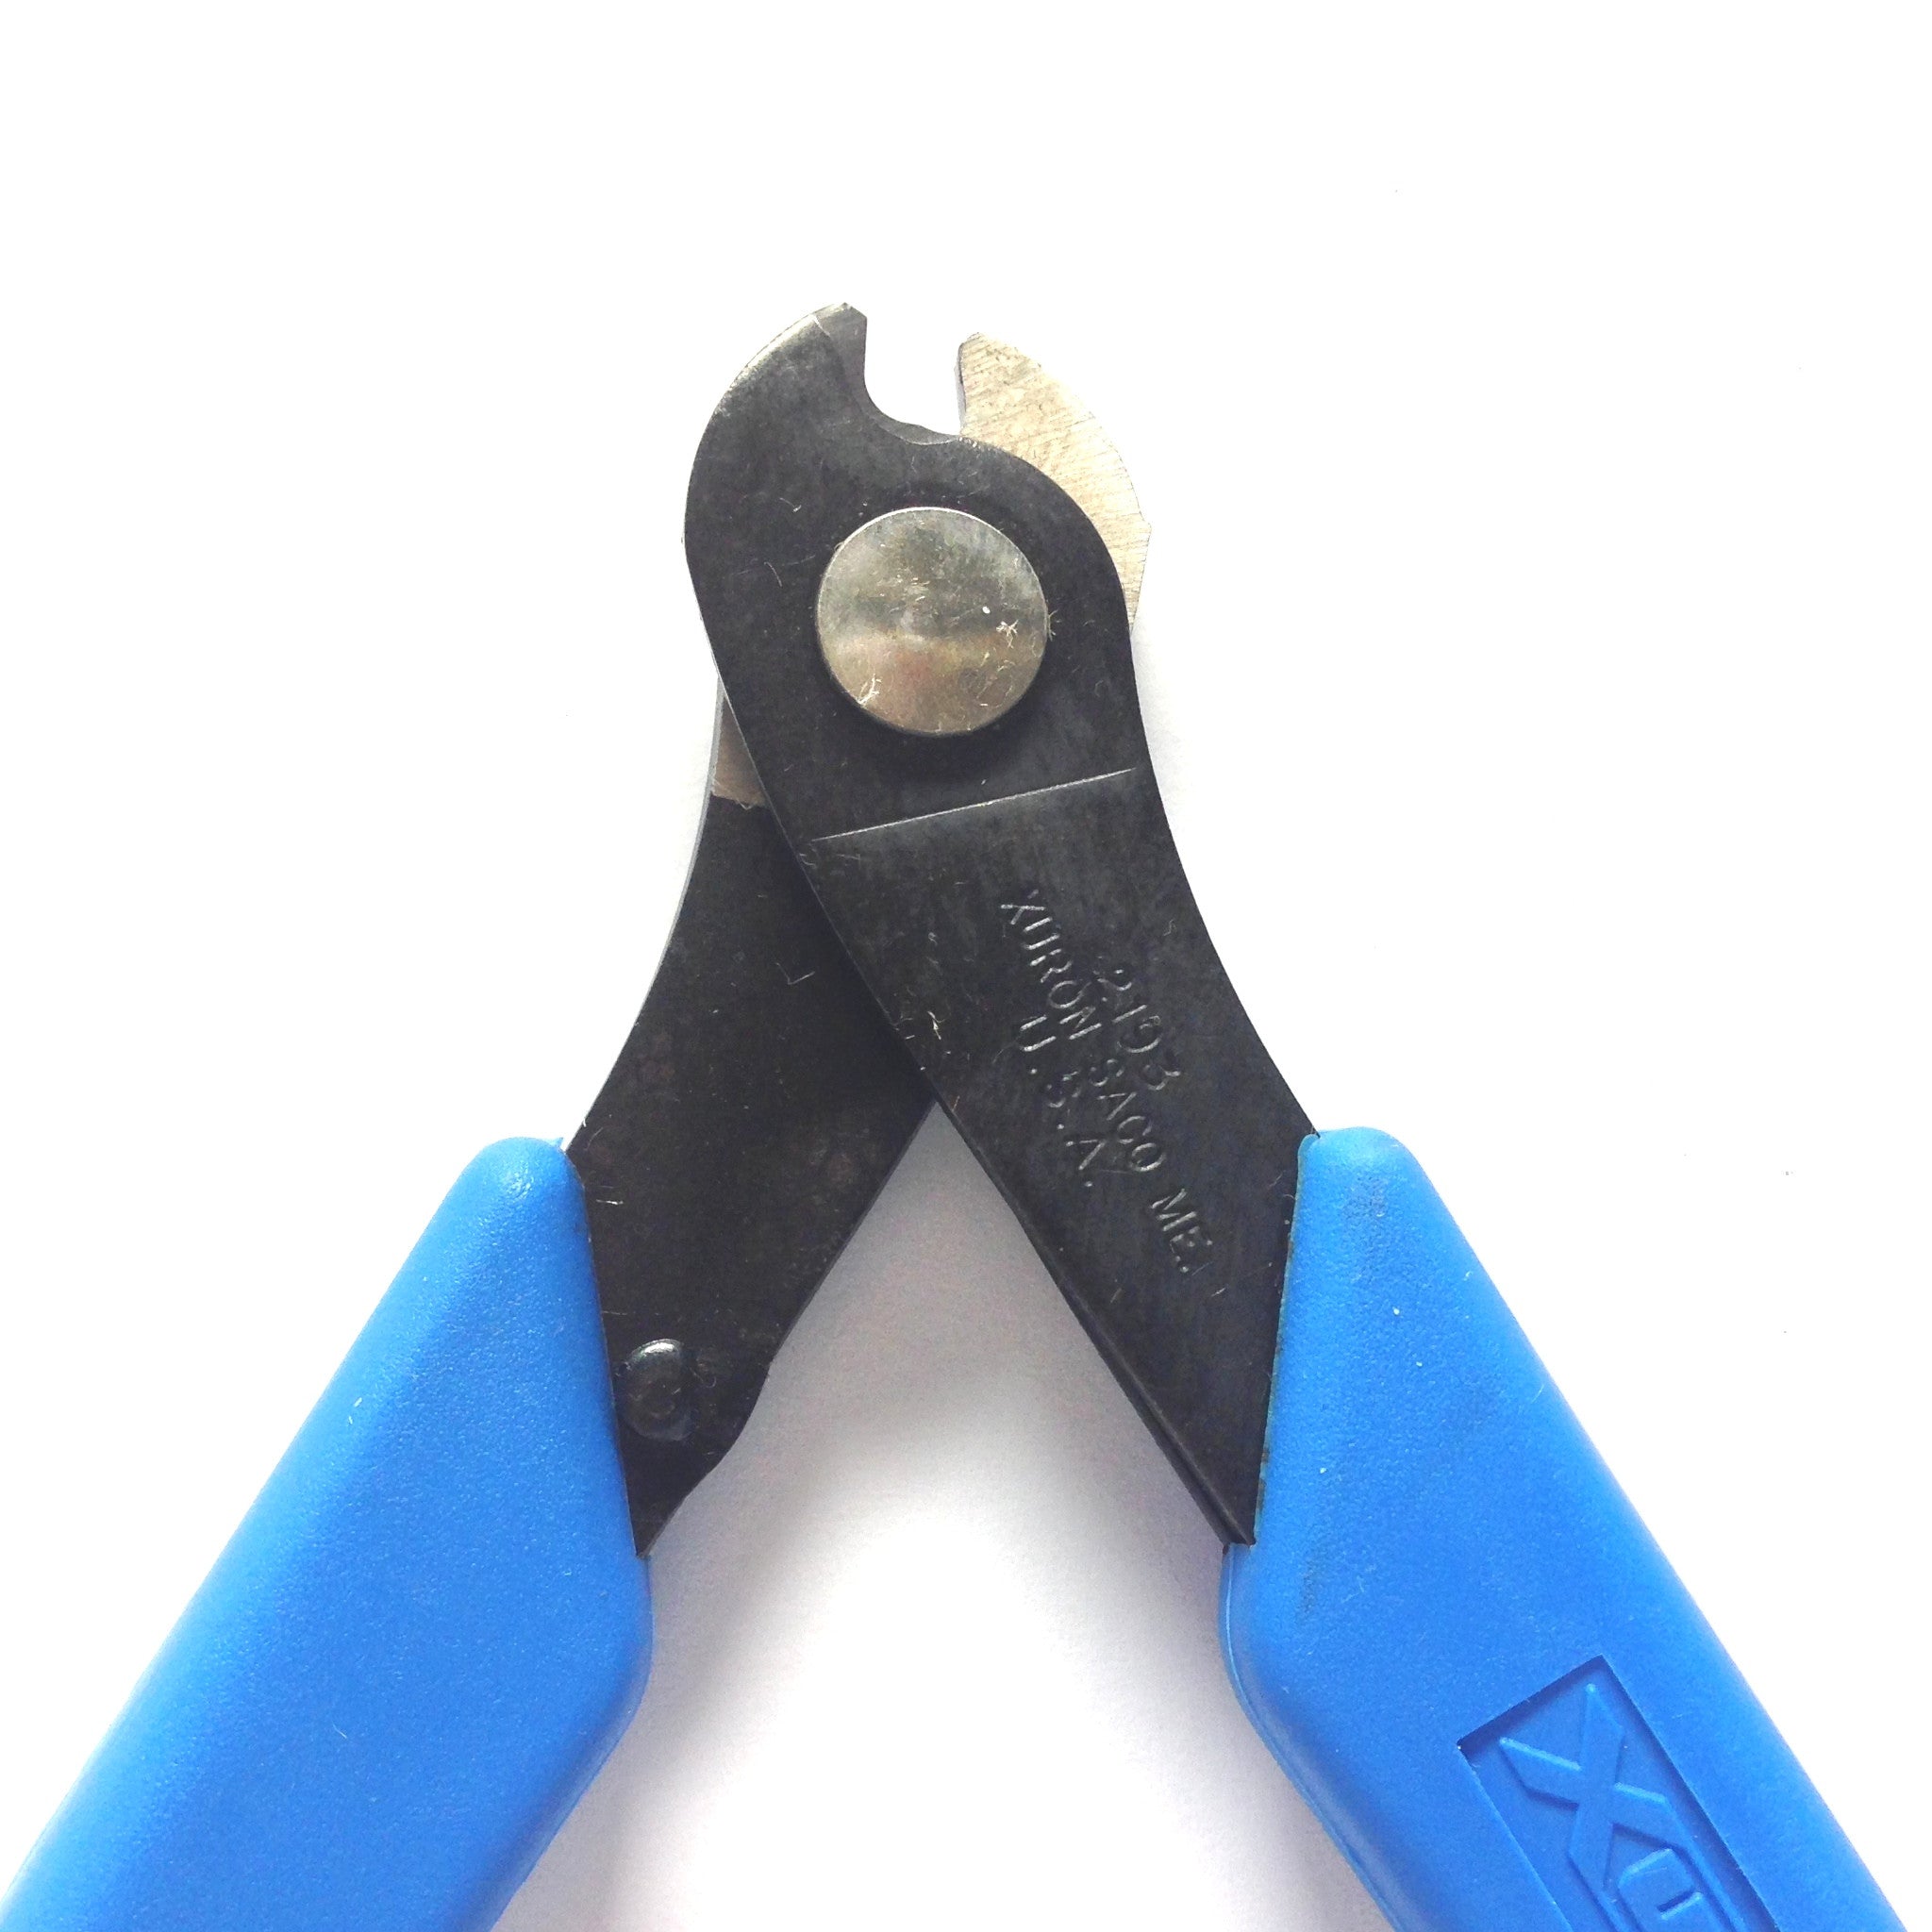 Cable/Memory Wire Cutter With Spring U.S.A. (1 piece)